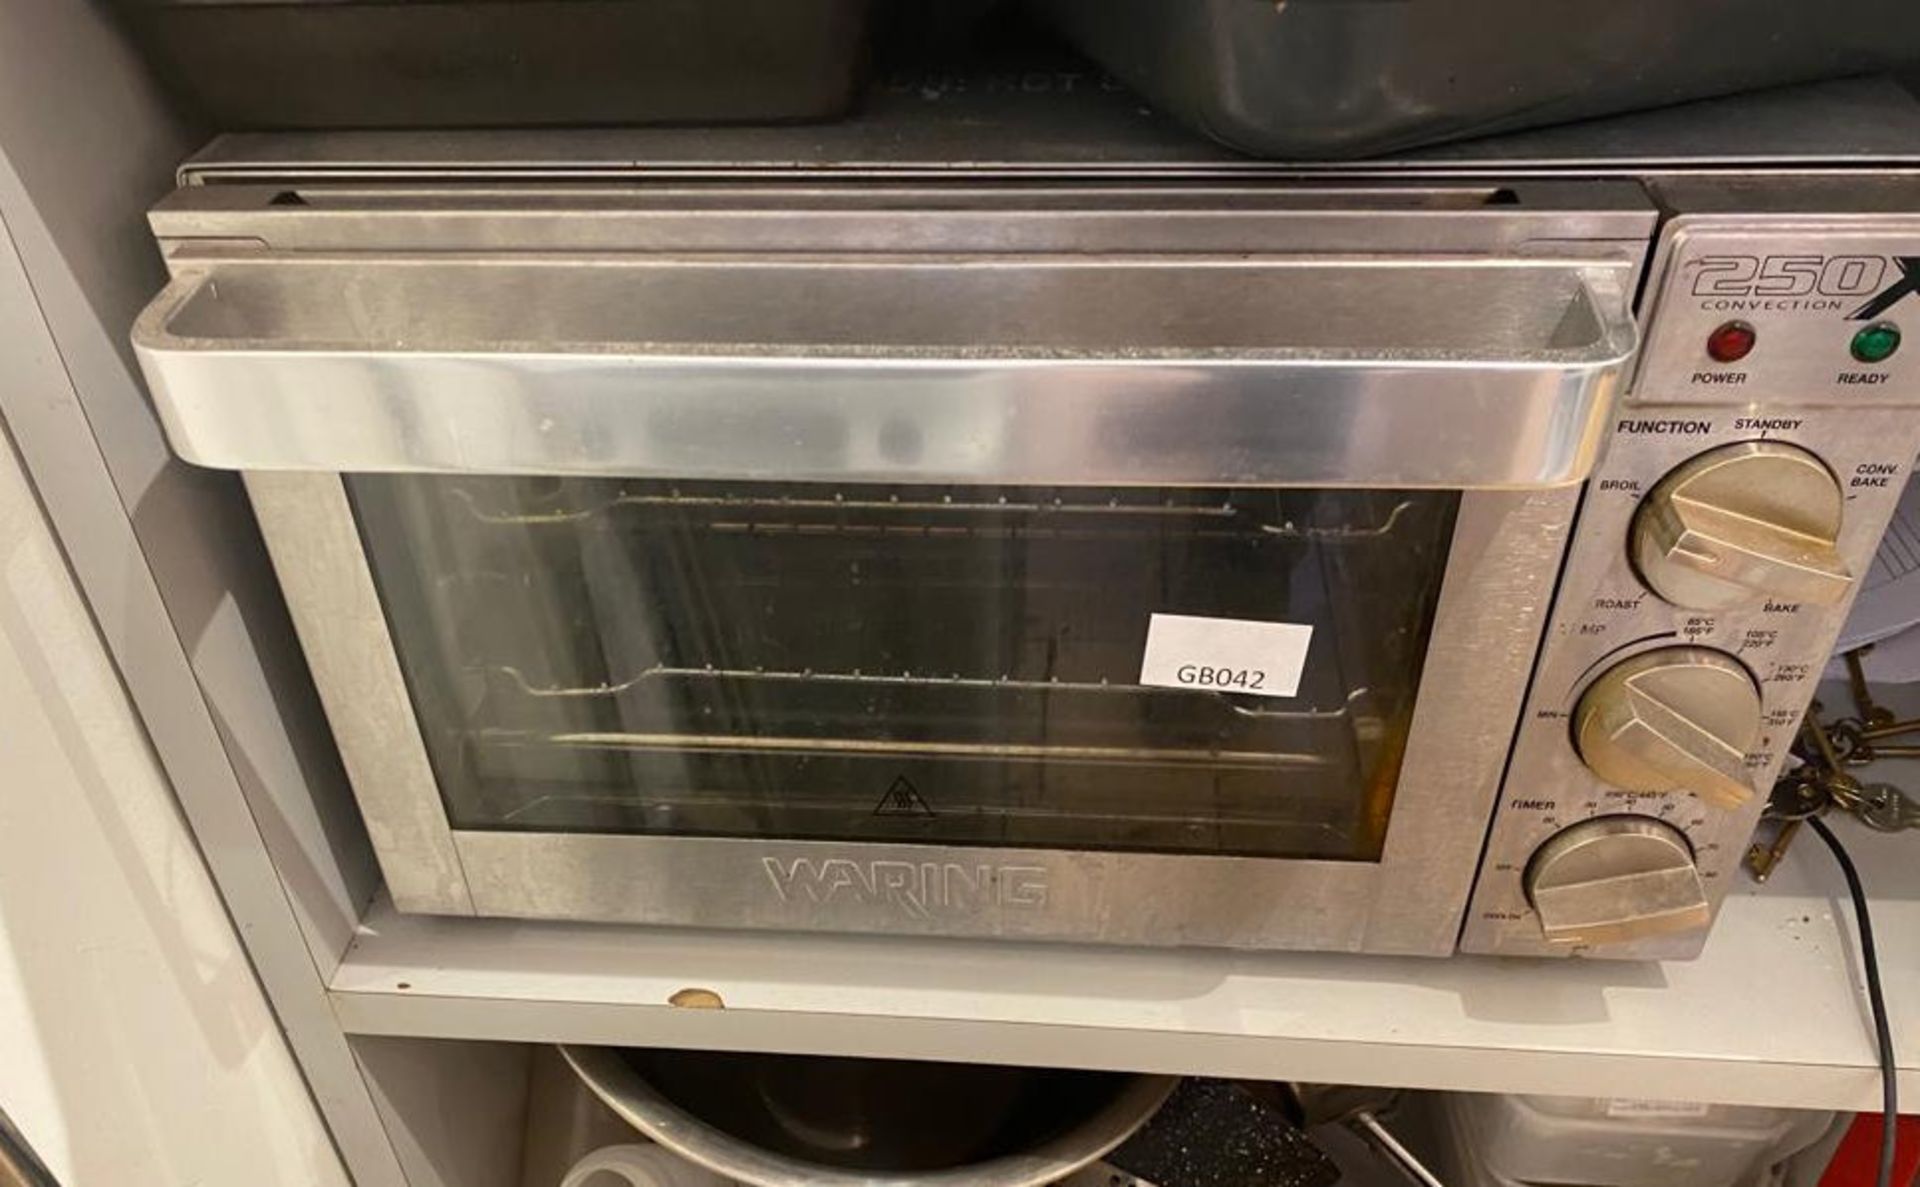 1 x Waring 250X Convection Combination Oven In Stainless Steel - CL776 - Ref: GB042 - Location: - Bild 2 aus 2